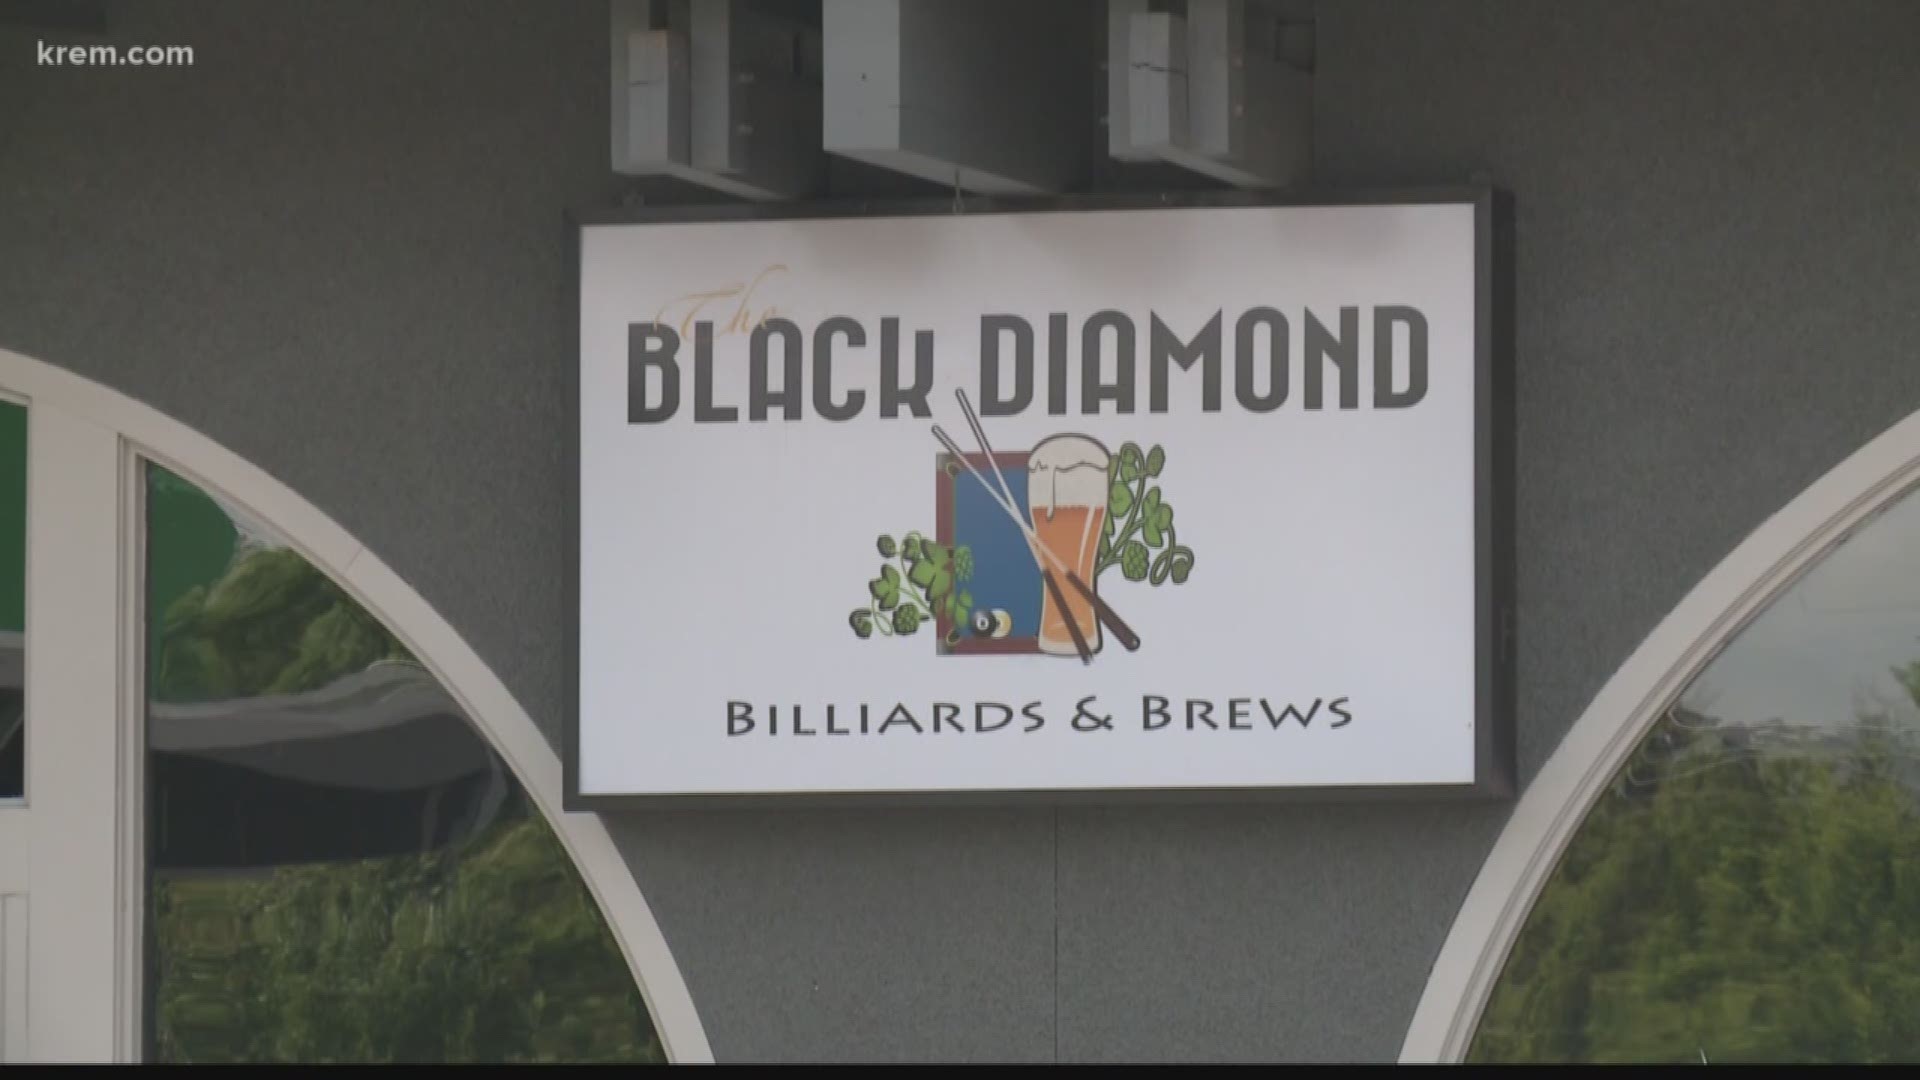 The Black Diamond in Spokane Valley has received a violation notice from the state, with a penalty of a five-day license suspension or $500 fine.